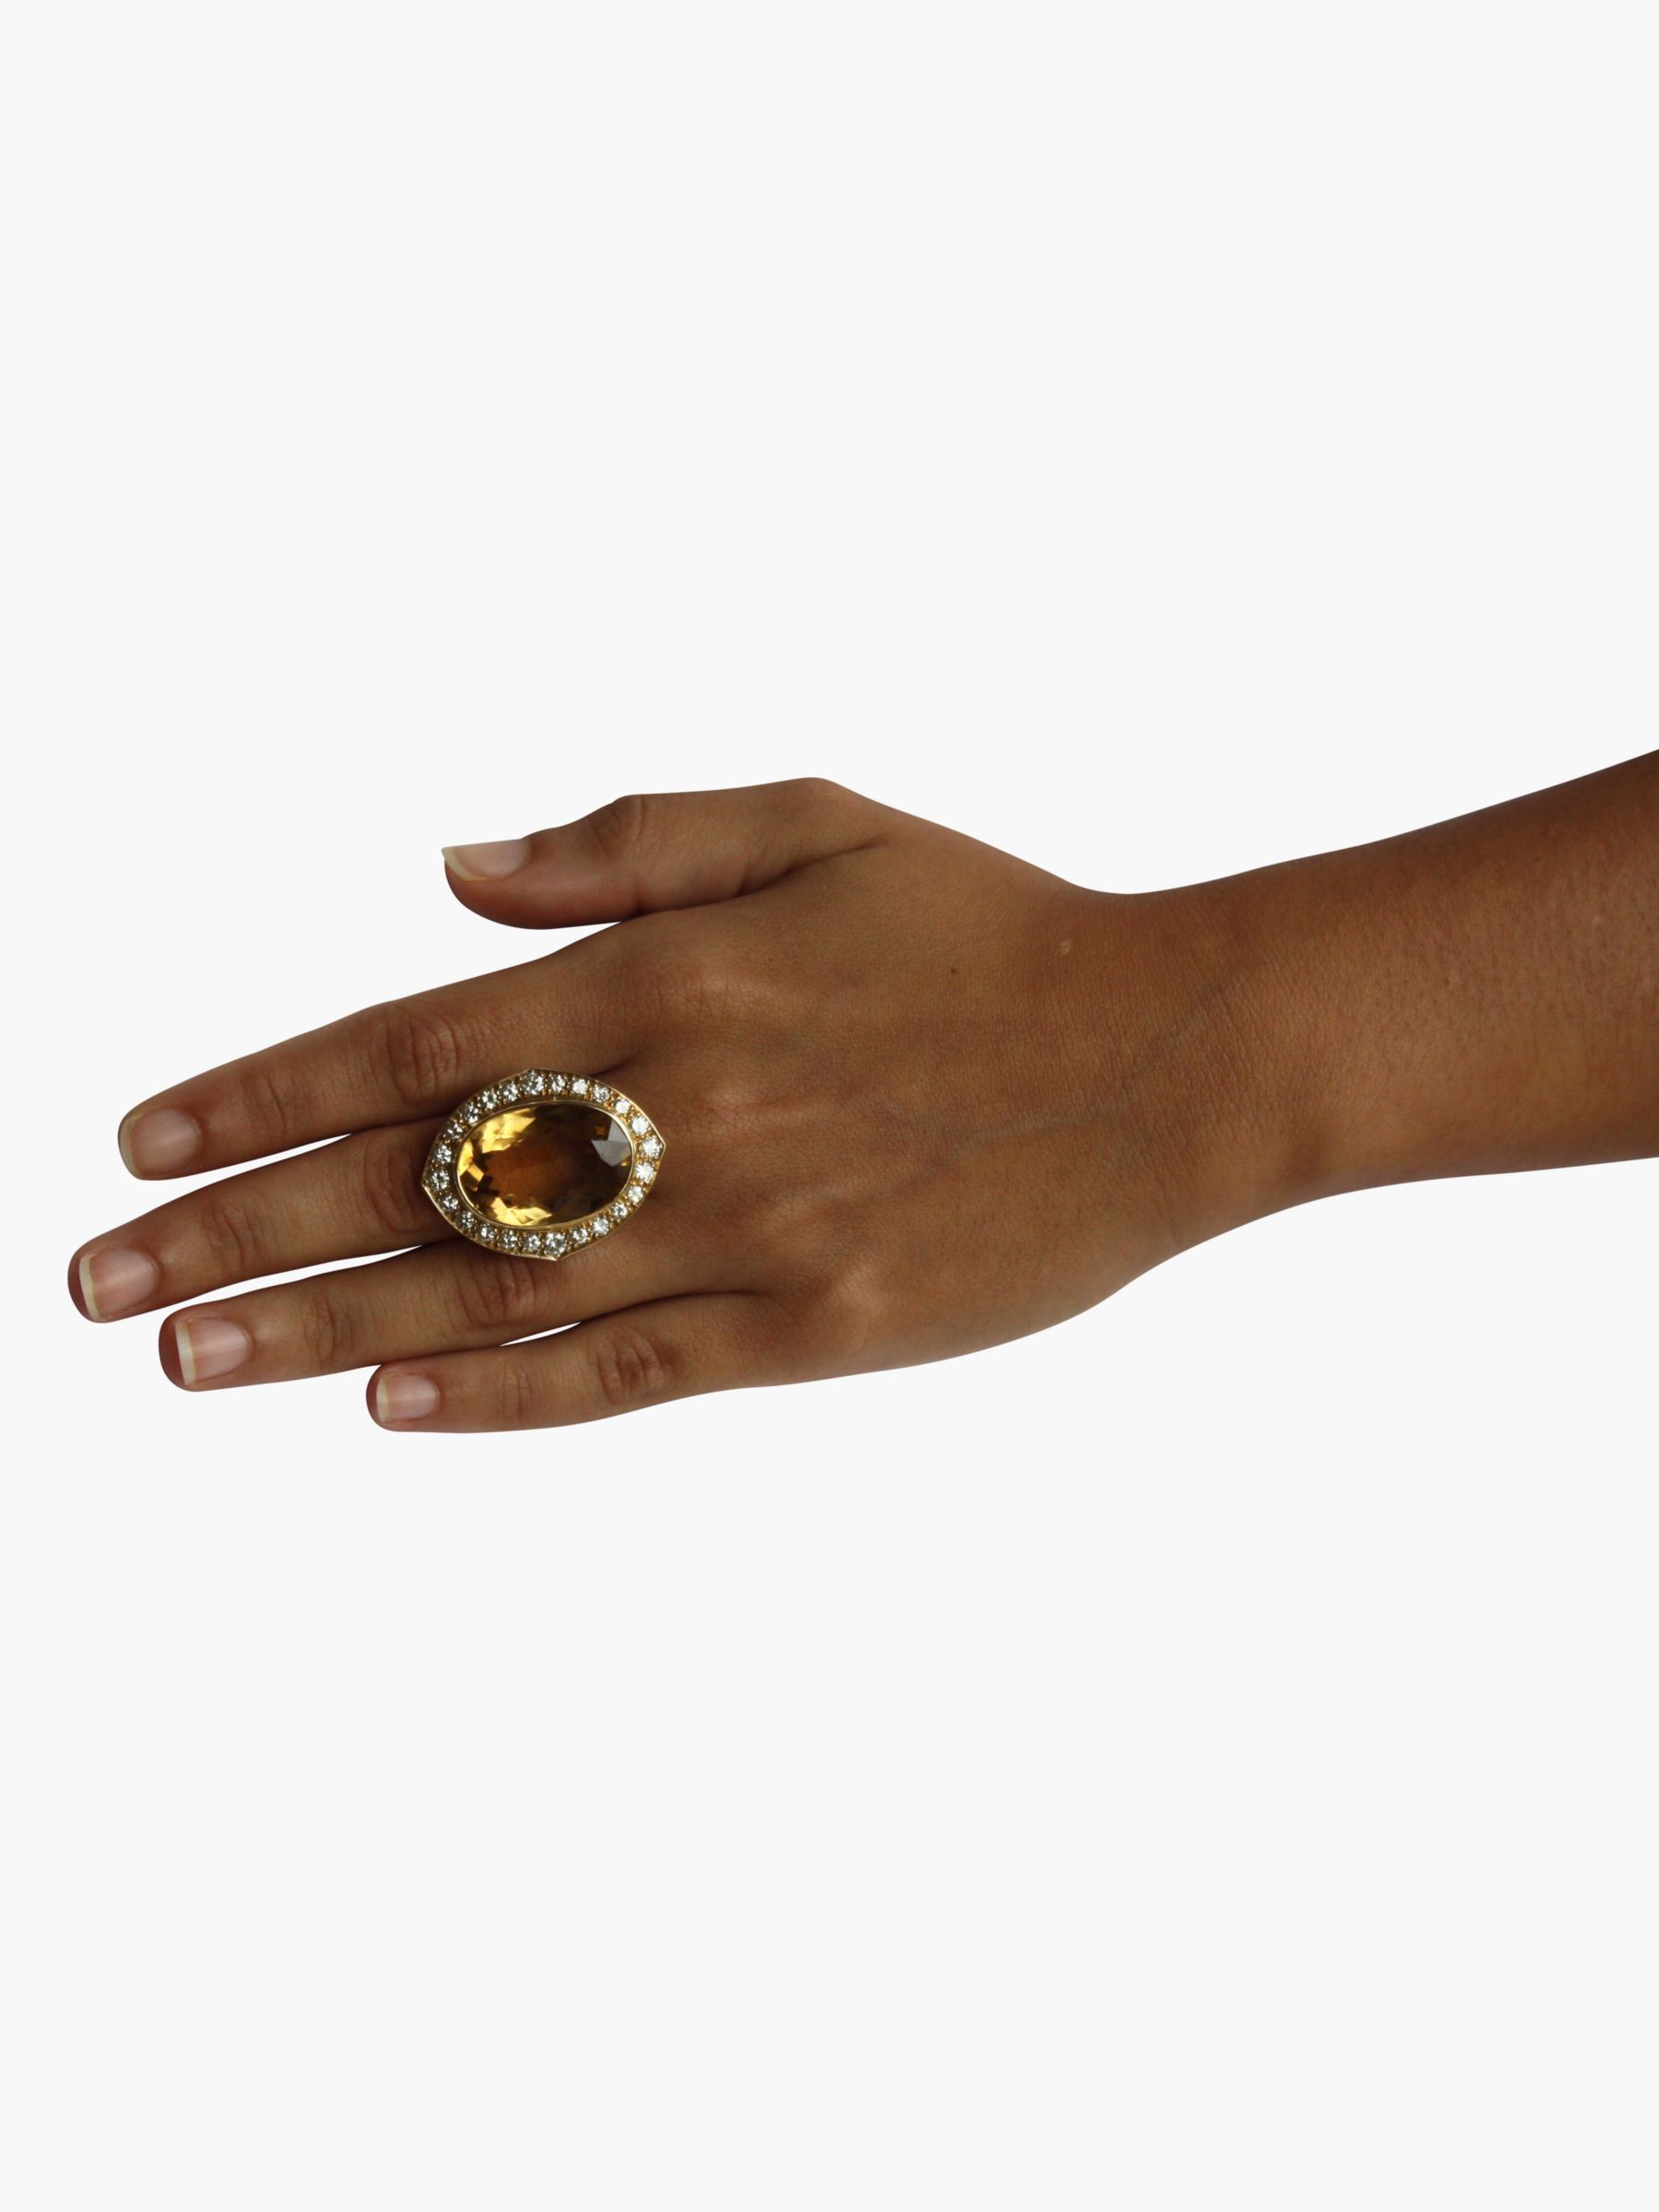 Vintage Fine Jewellery Second Hand 18ct Yellow Gold Diamond & Oval Citrine Ring, Dated Circa 1960s